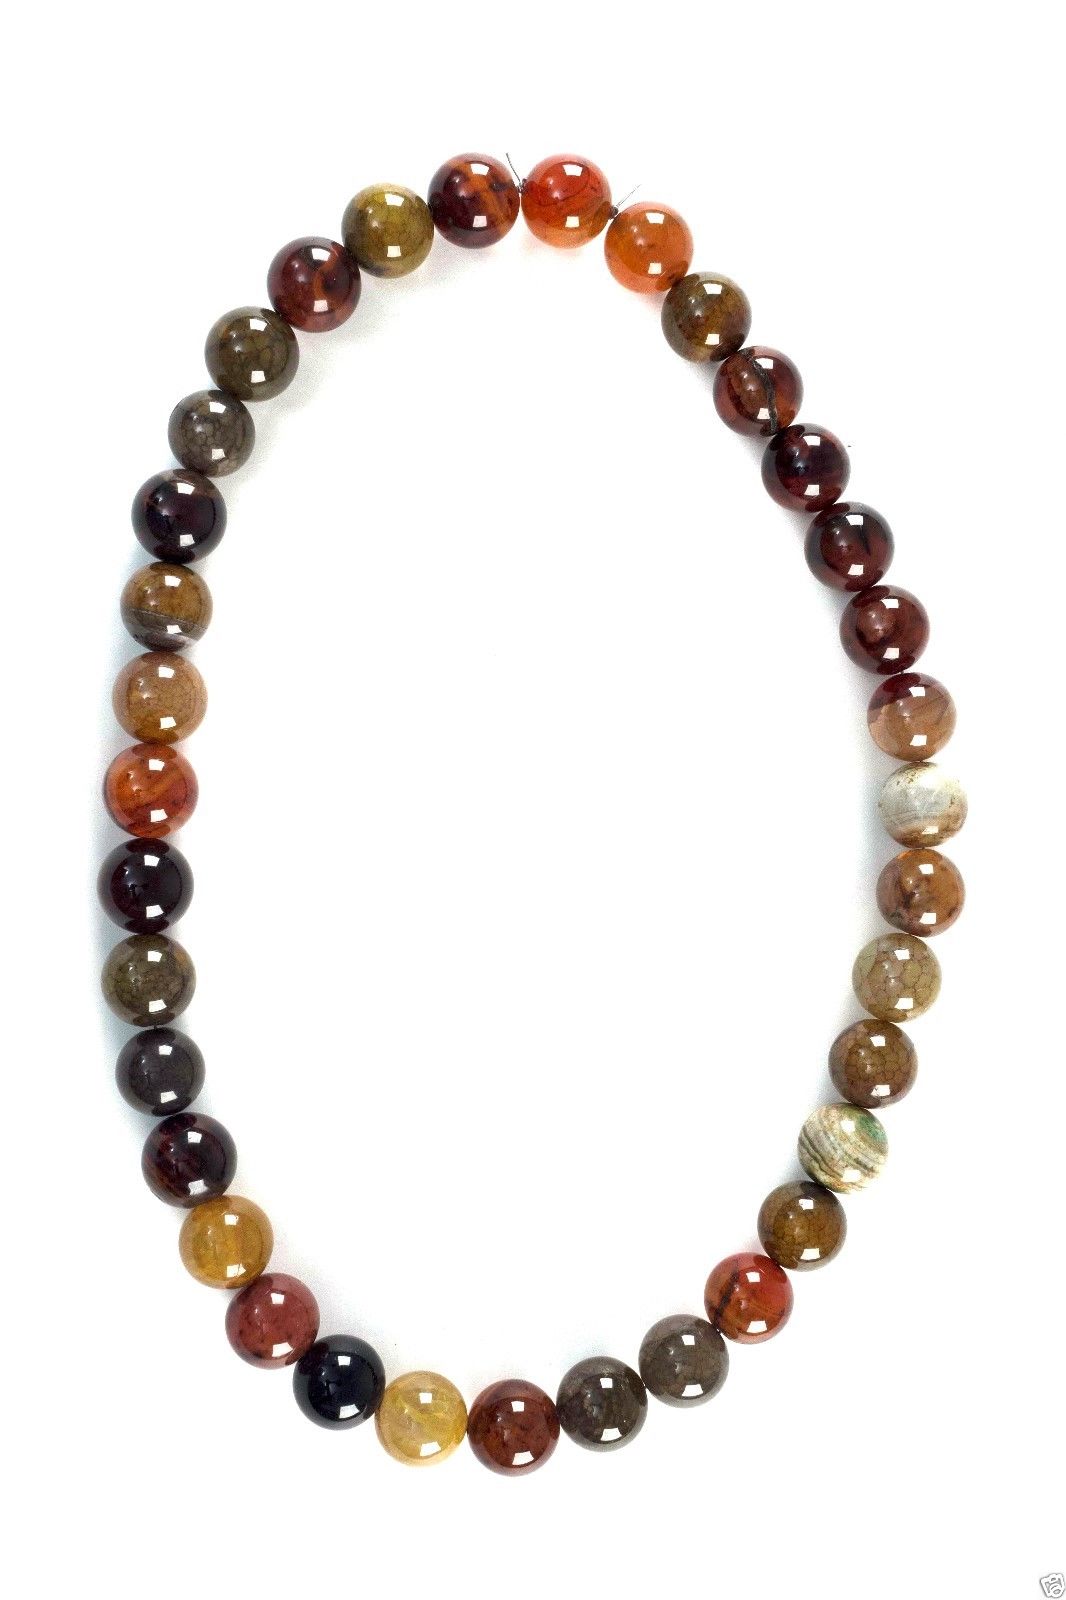 Jewelry015 Estate 35 agate beads necklace, bead 18mm, 24-26 inch